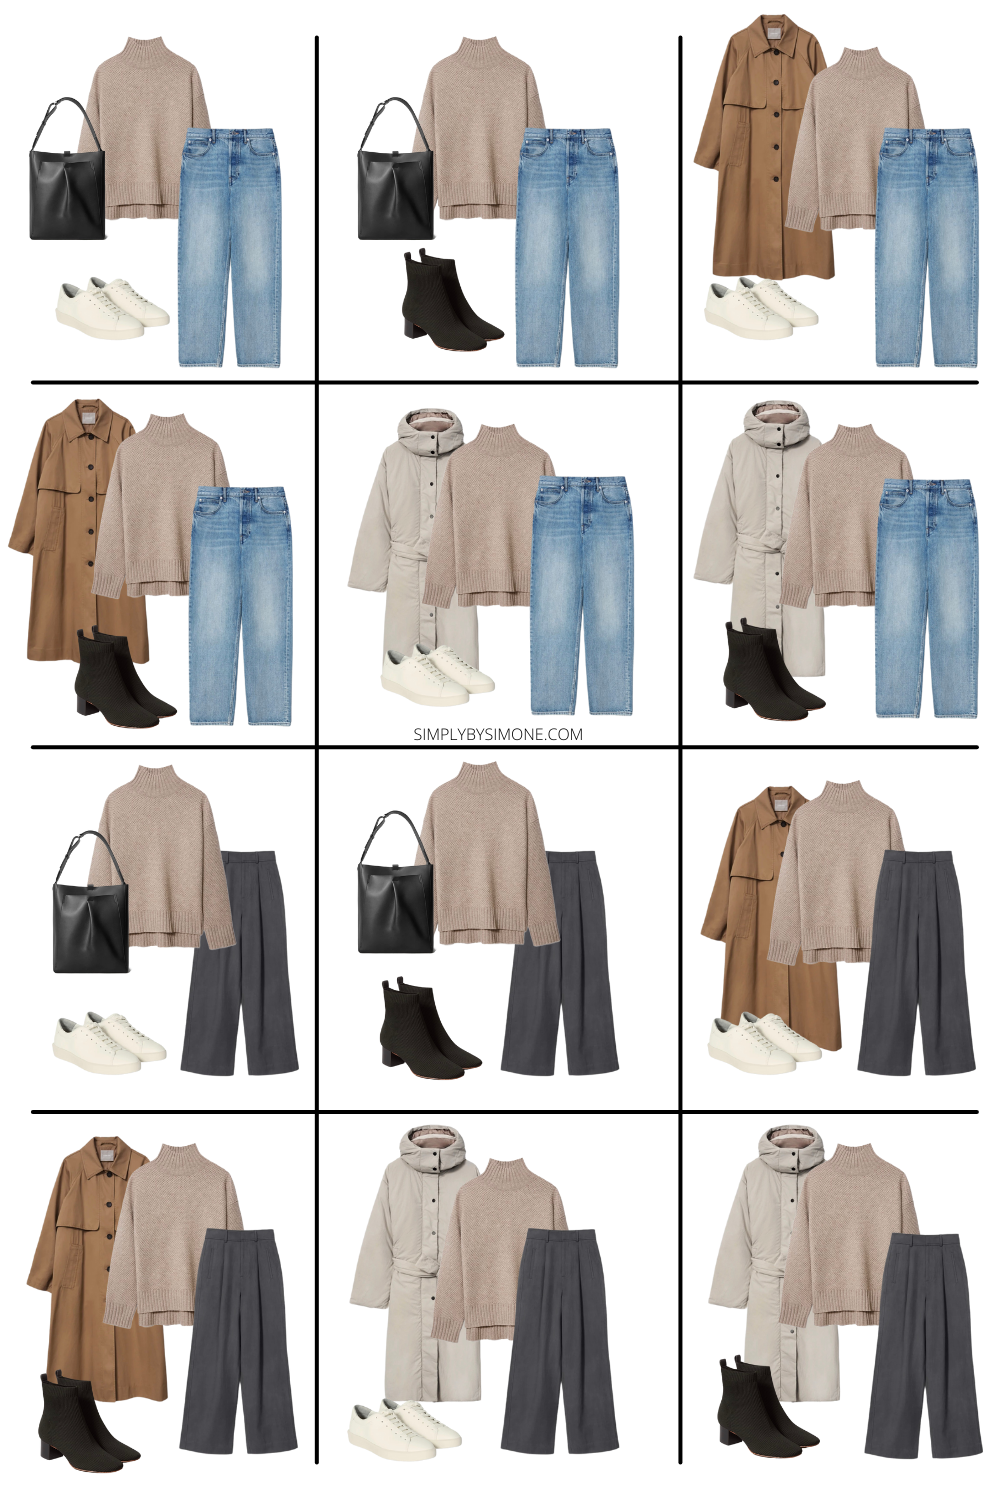 Affordable Everlane Winter Capsule Wardrobe 10 Pieces 36 Outfits How To Build A Capsule